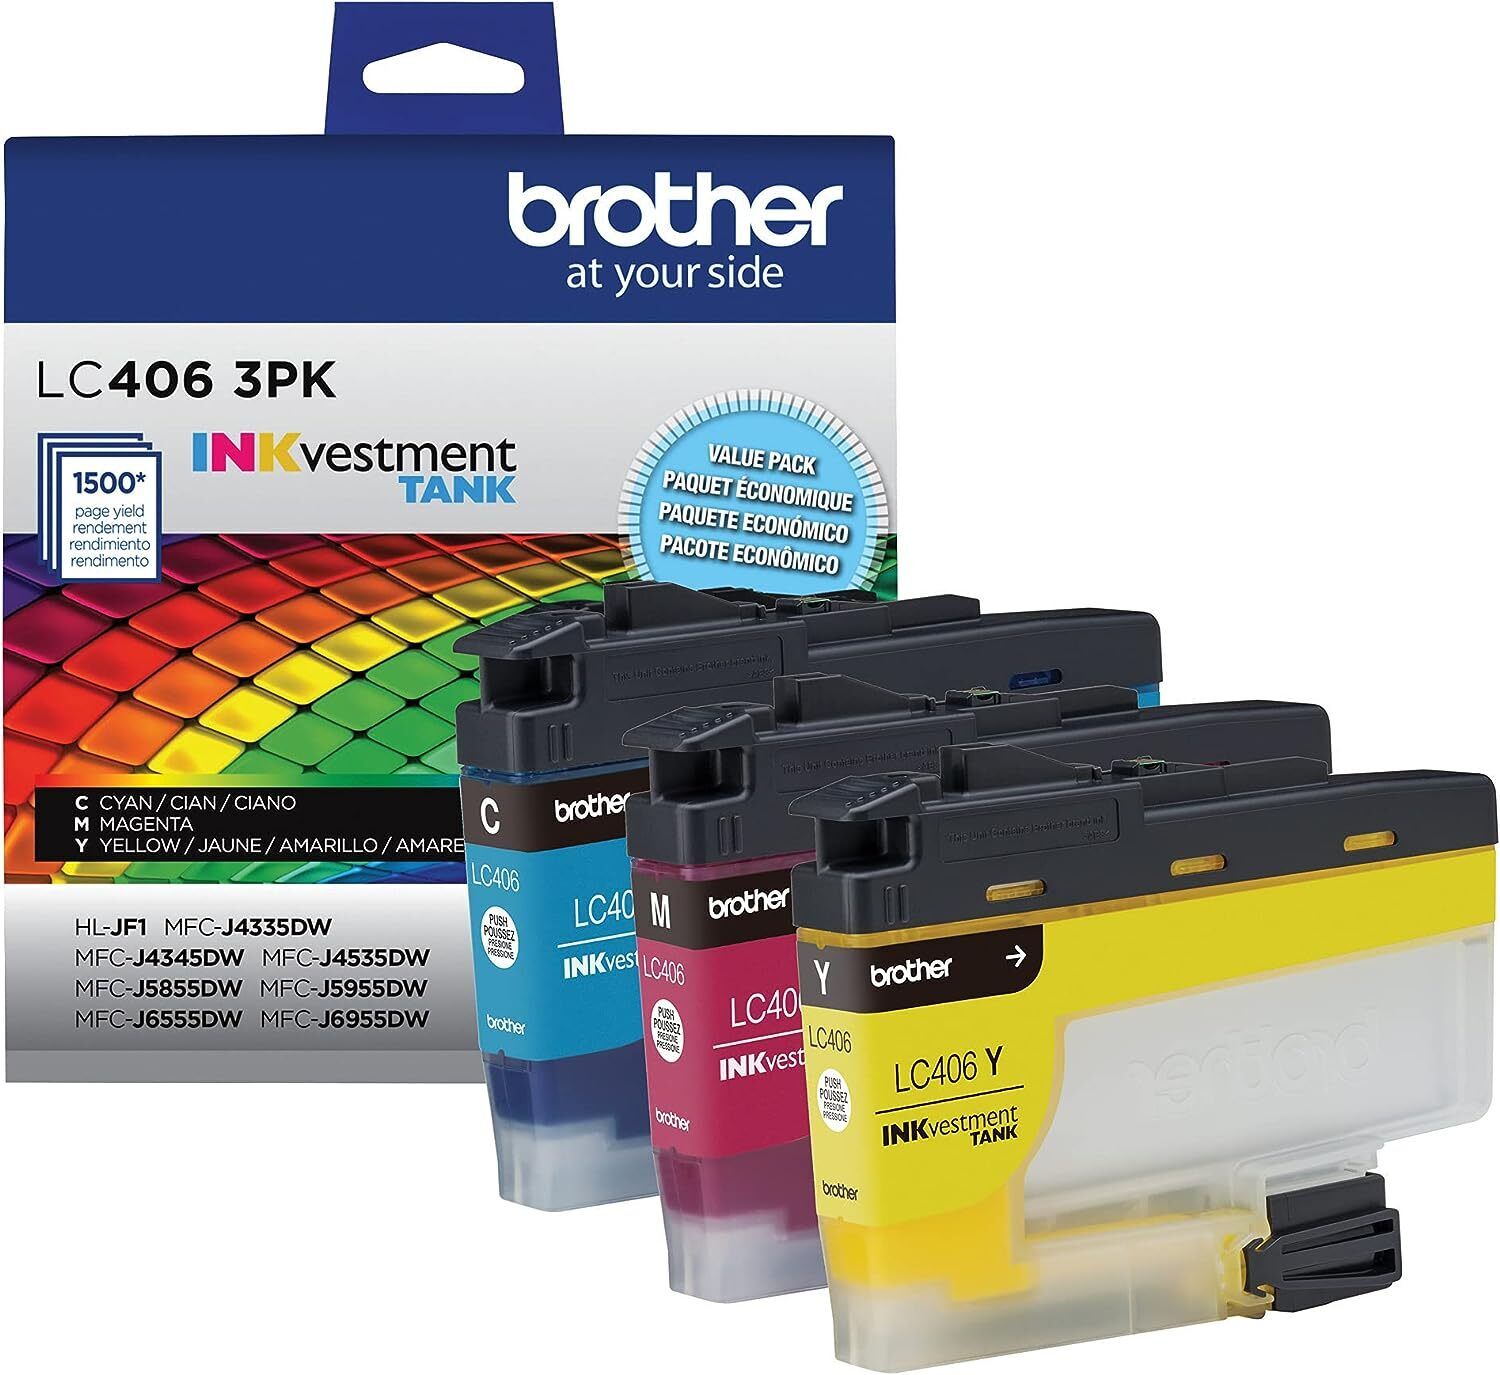 Genuine Brother LC406 Black or Color INKvestment Tank Ink Cartridges for MFC NEW